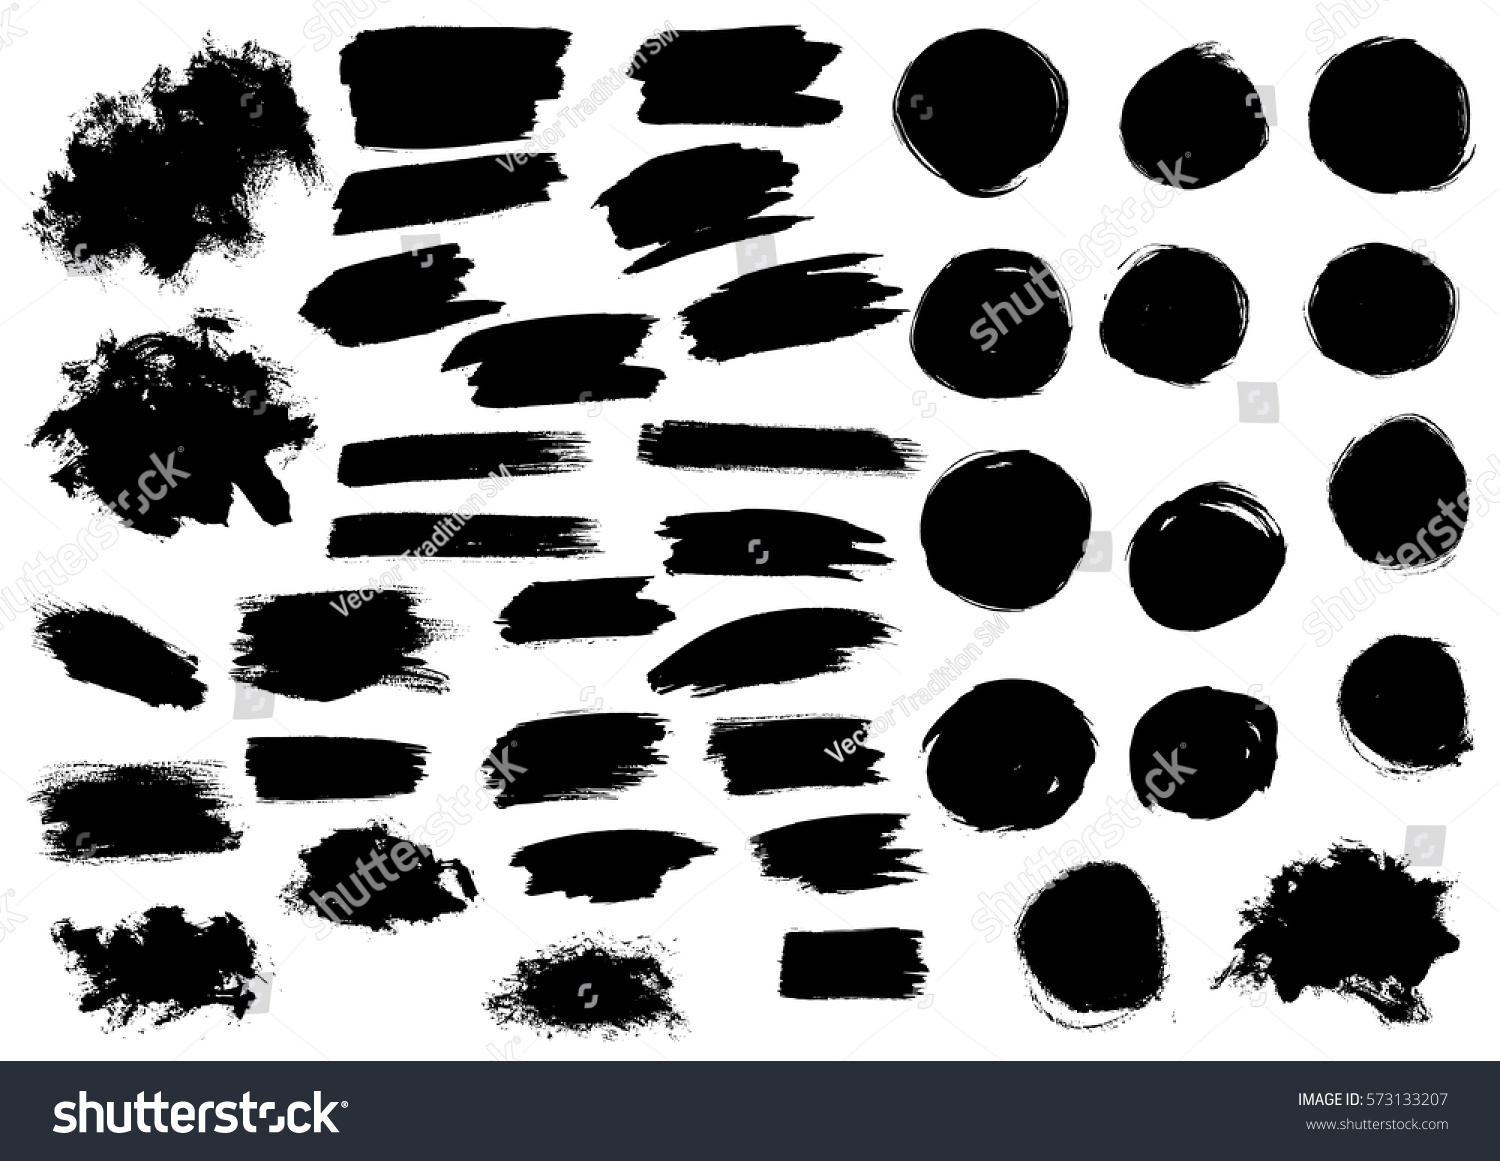 Paint blobs and daubs, black watercolor blots and blotches. Vector grunge texture scribbles, abstract dash lines or brushstrokes dabs, ink smear smudges and stains traces set with grunge texture #573133207